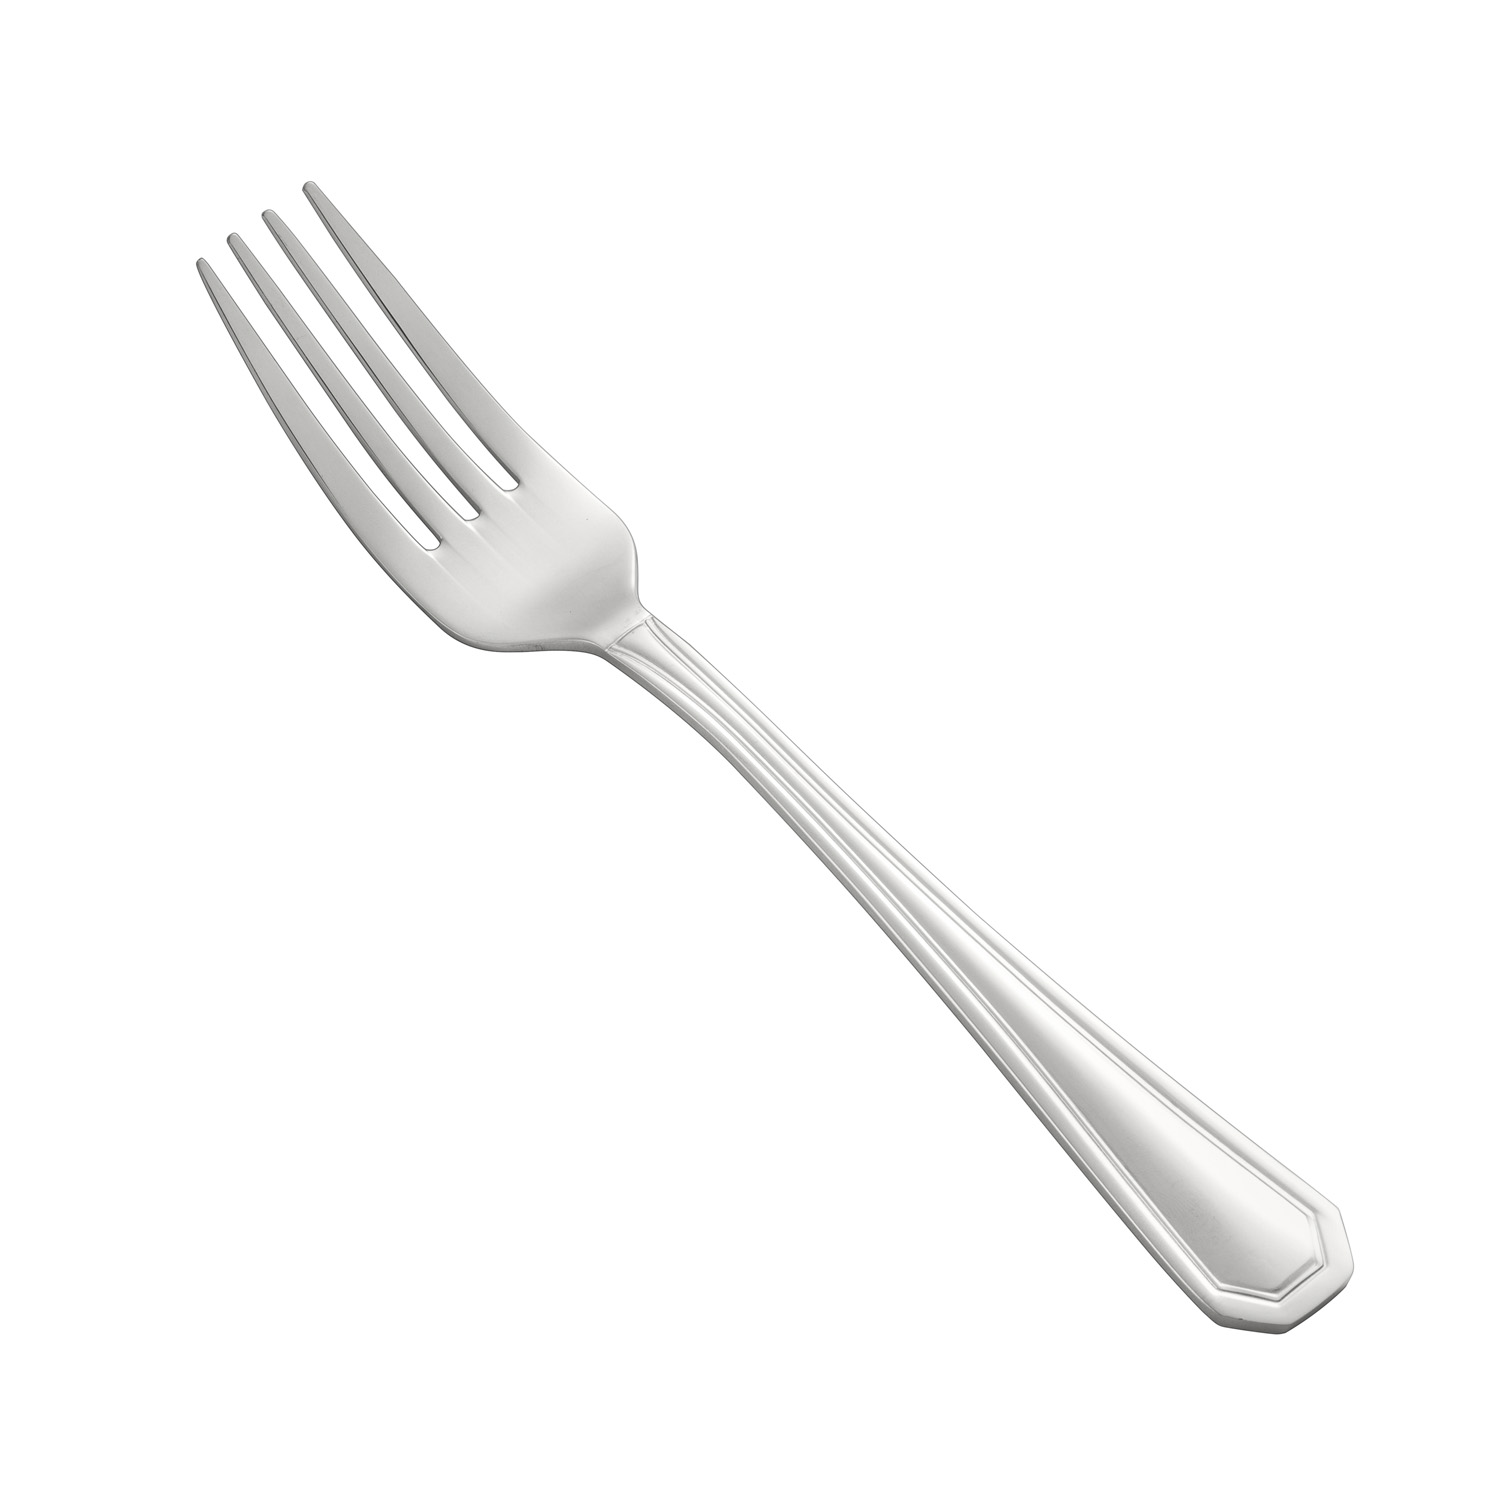 CAC China 8006-05 Lux Dinner Fork, Extra Heavyweight 18/8, 7 1/4"